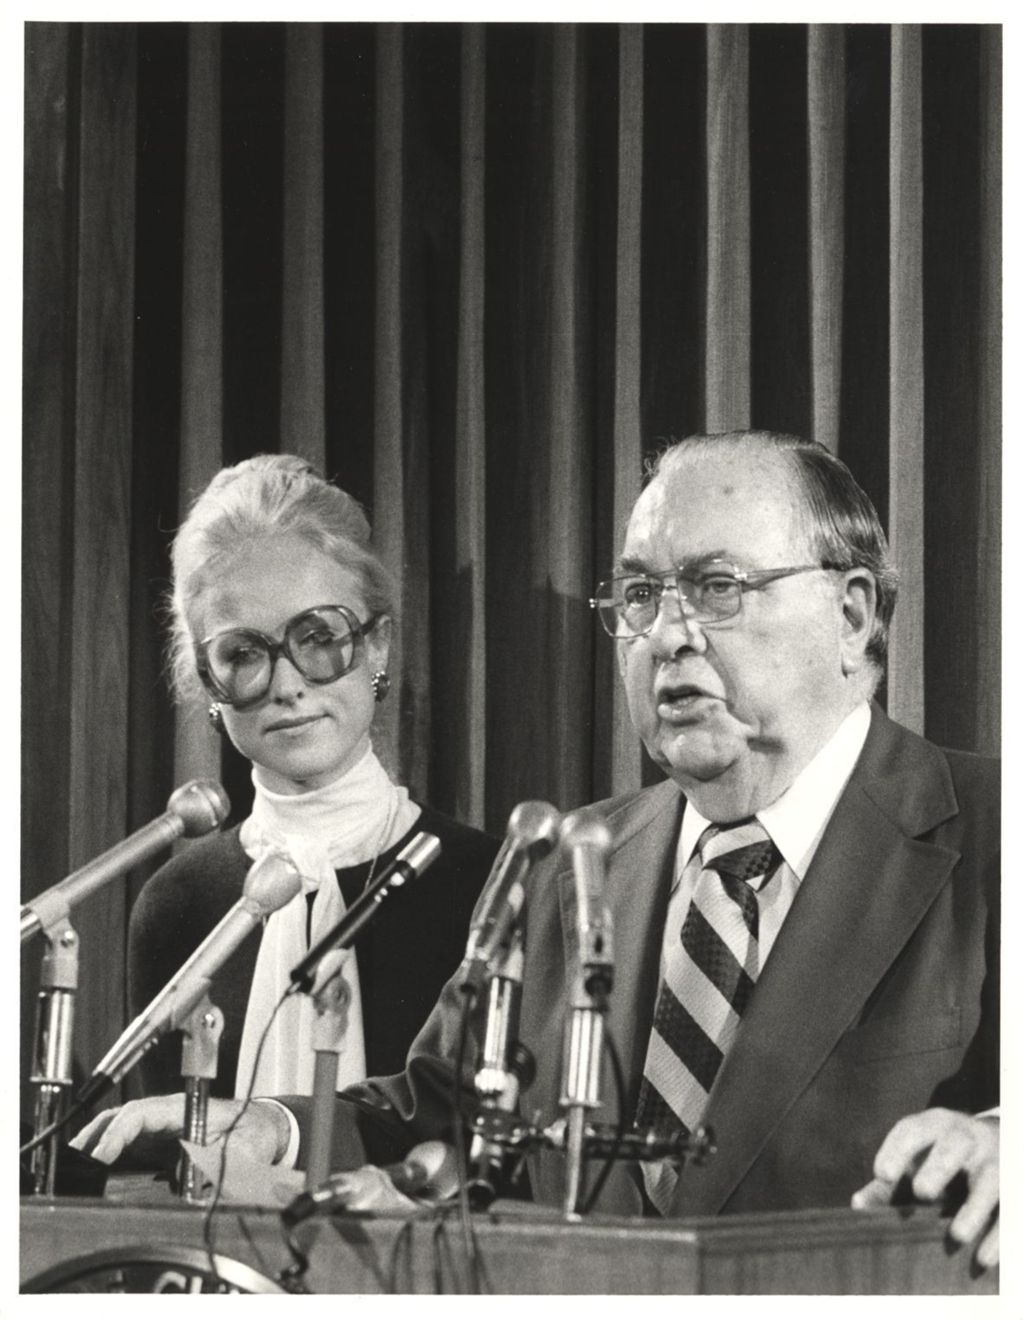 Richard J. Daley with Heather Morgan at a press conference